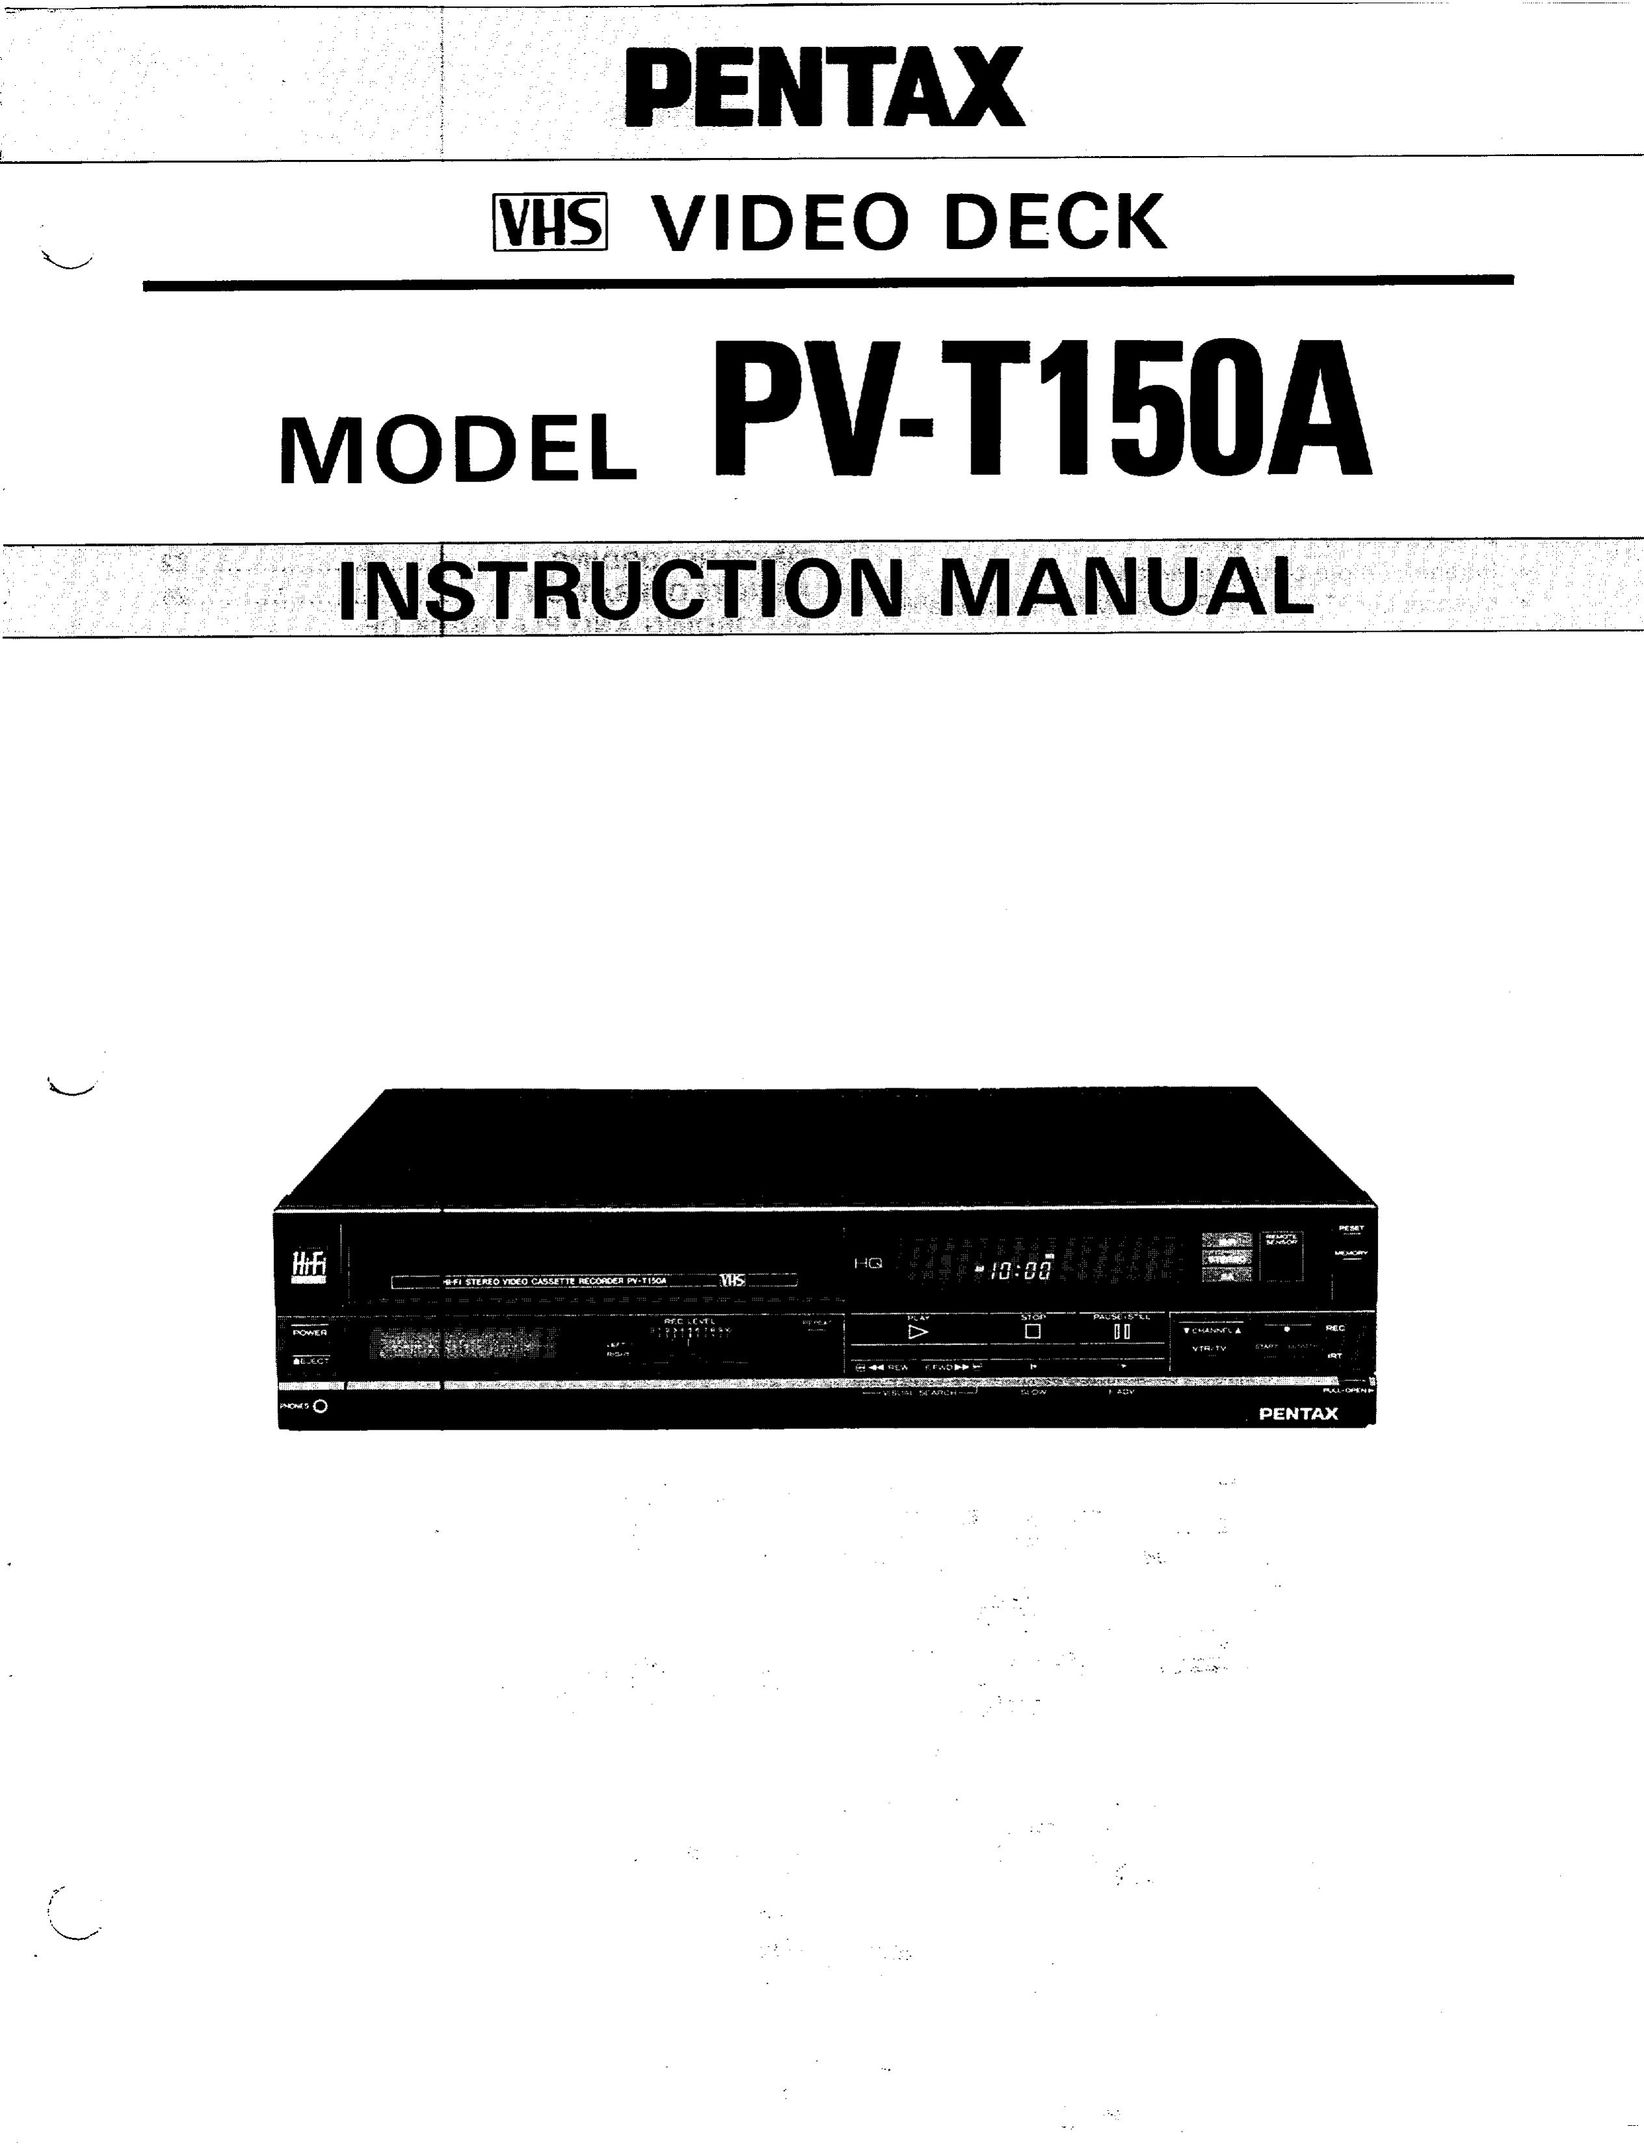 Pentax PV-T150A TV VCR Combo User Manual